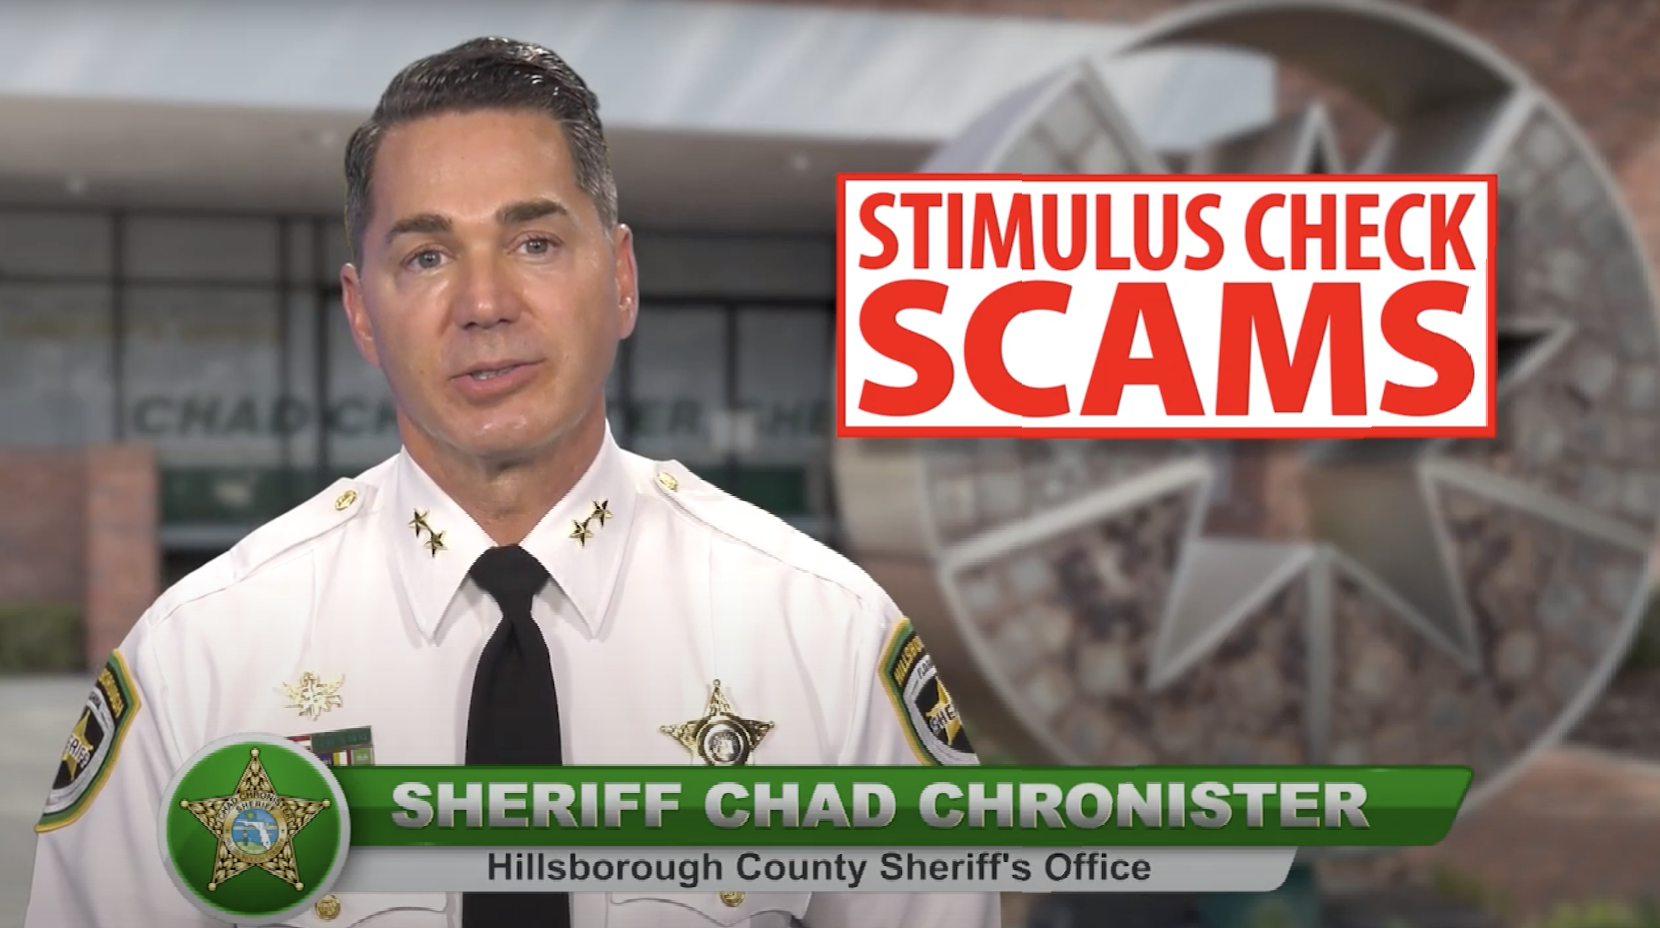 Beware of stimulus check scams image